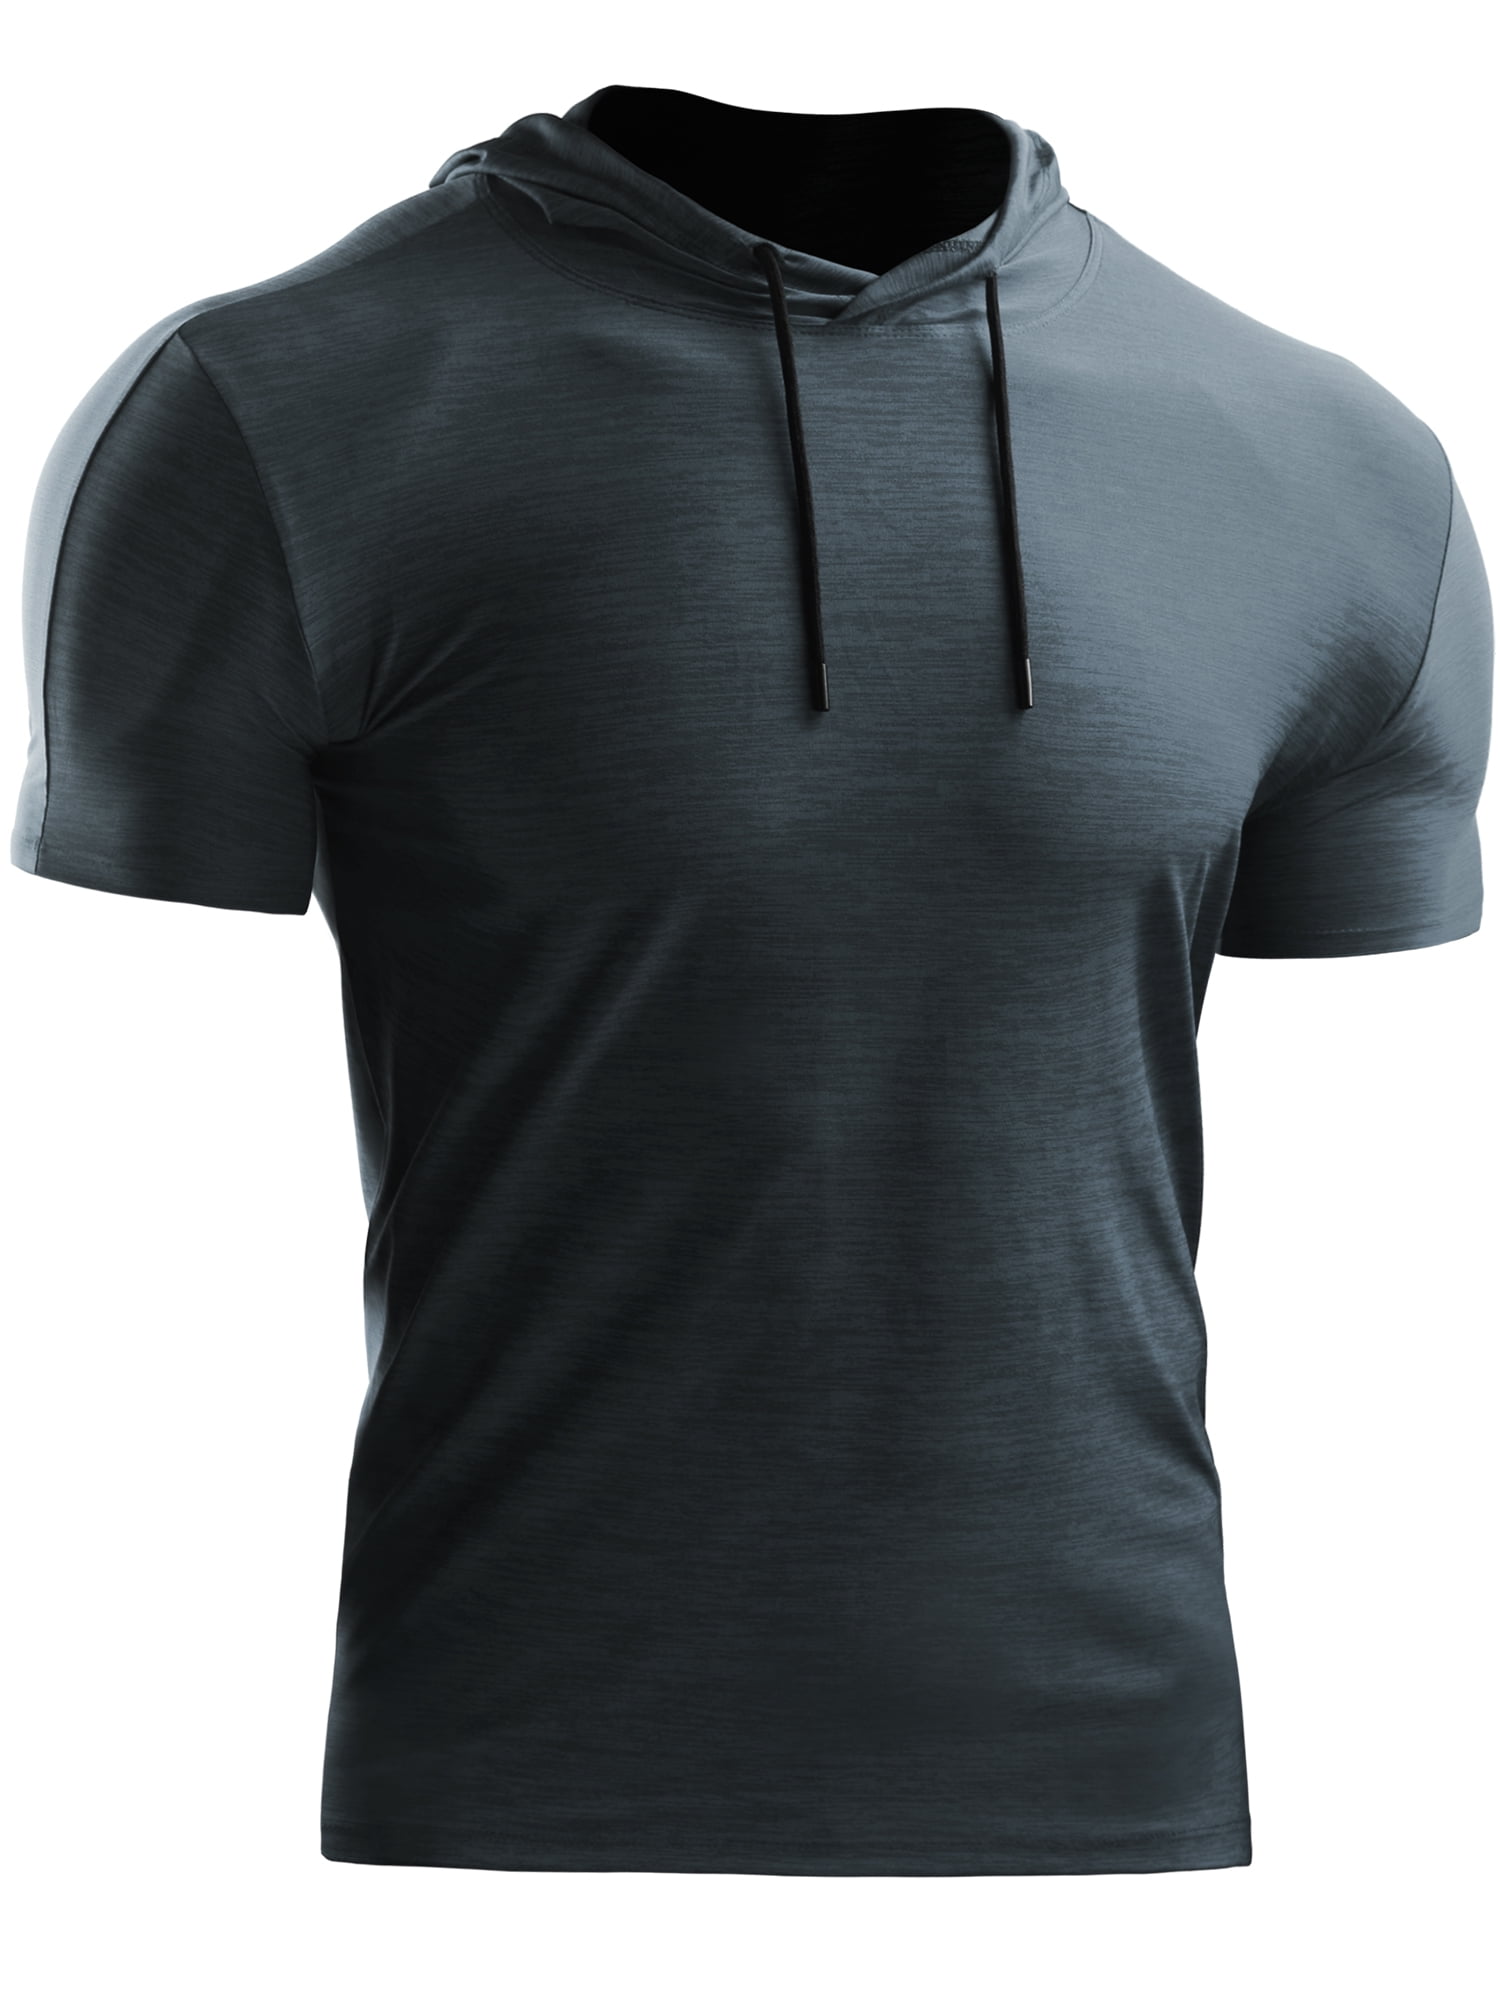 men-short-sleeve-pullover-hoodies-sweatshirts-tops-casual-lightweight-sports-workout-athletic